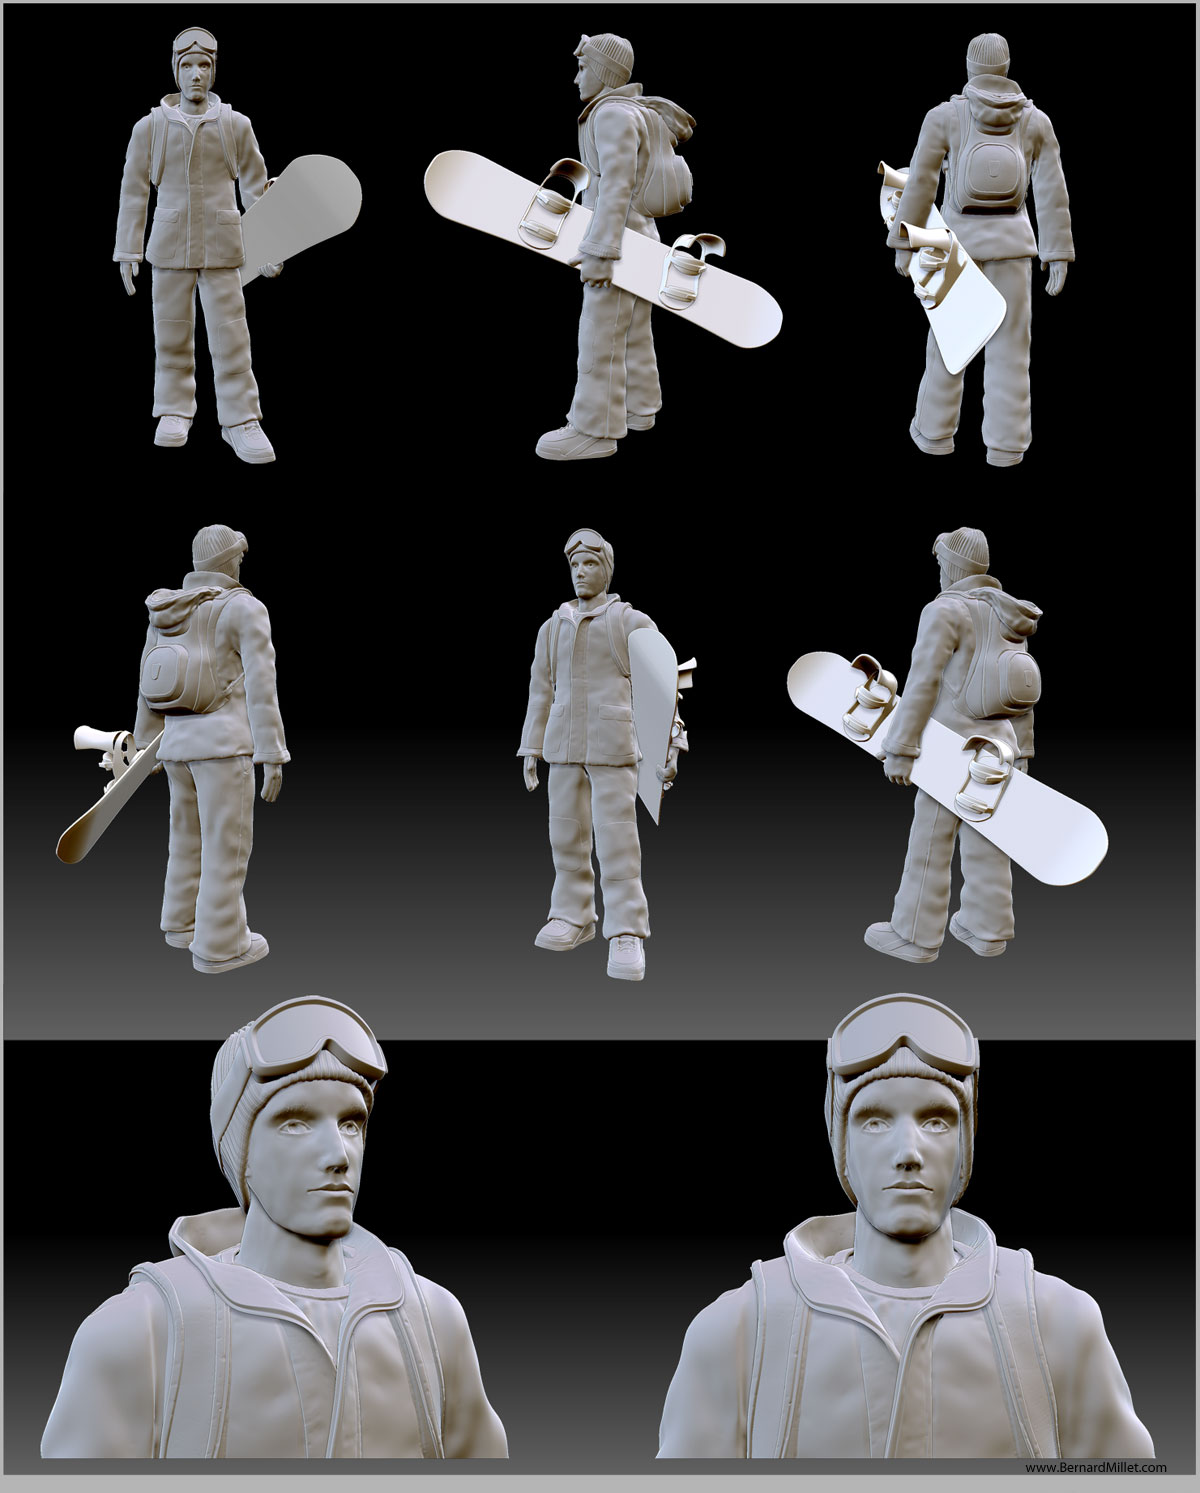 snowboard-personnage 3D